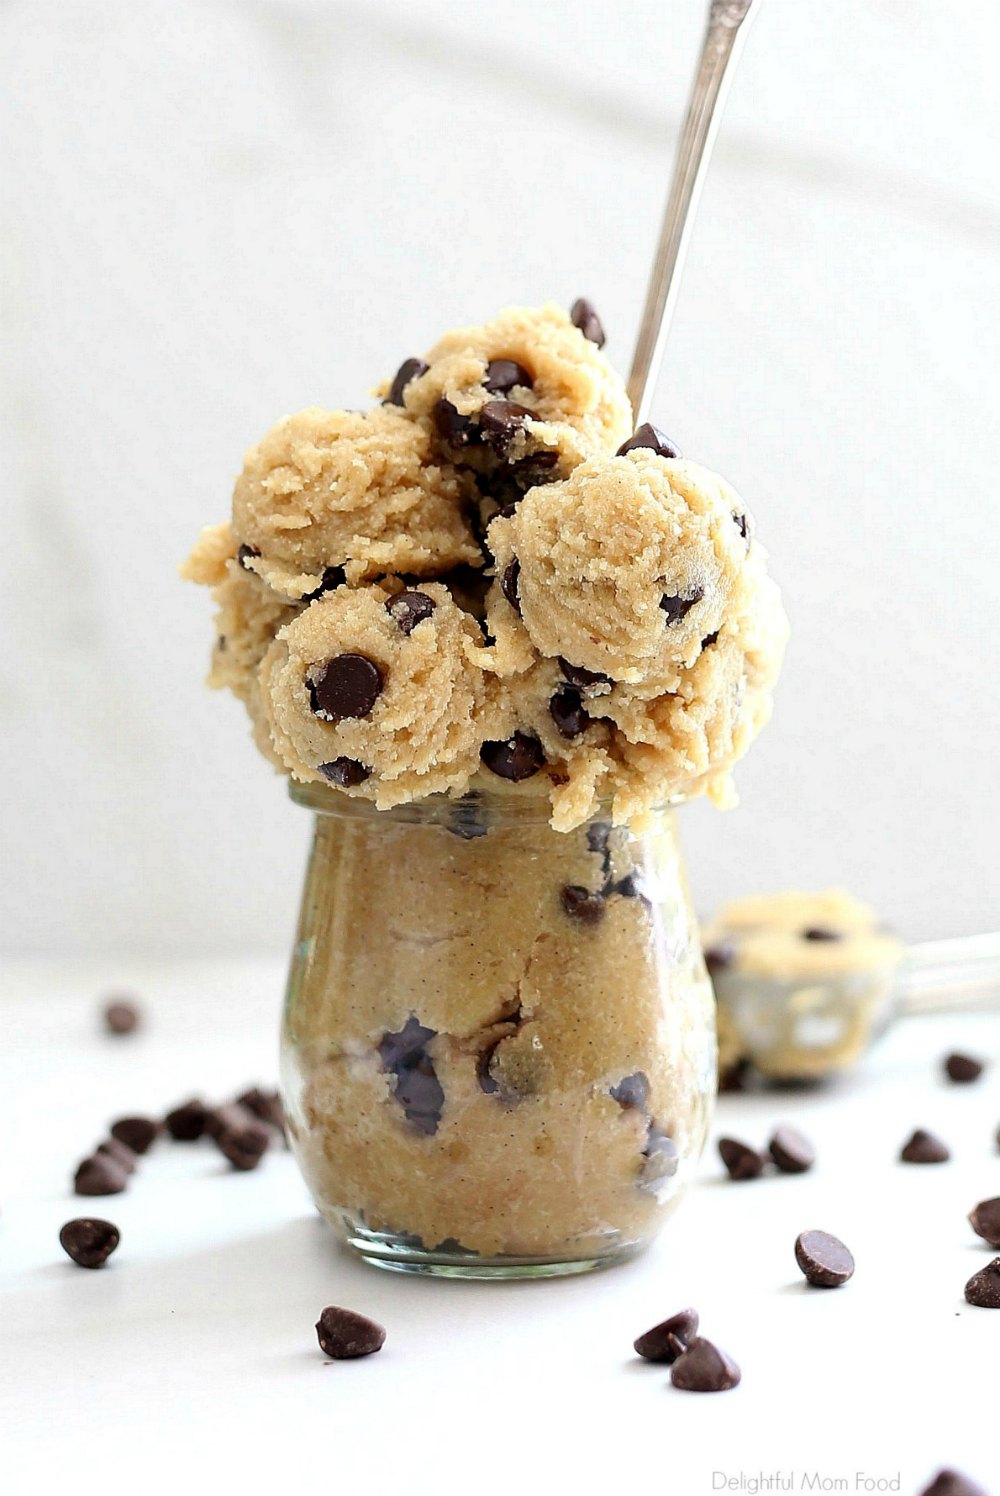 You will love making this easy, raw, edible cookie dough recipe! This egg-free version is safe to eat and the cookie dough is made from almond flour. Get creative and add mini chocolate chips or colorful sprinkles! #rawediblecookiedough #ediblecookiedough #ediblerawdough #ediblechocolatechipcookiedough #treats #sweets #dessert #healthy #withoutflour #flourless #edible #cookiedough #glutenfree | Recipe at Delightful Mom Food